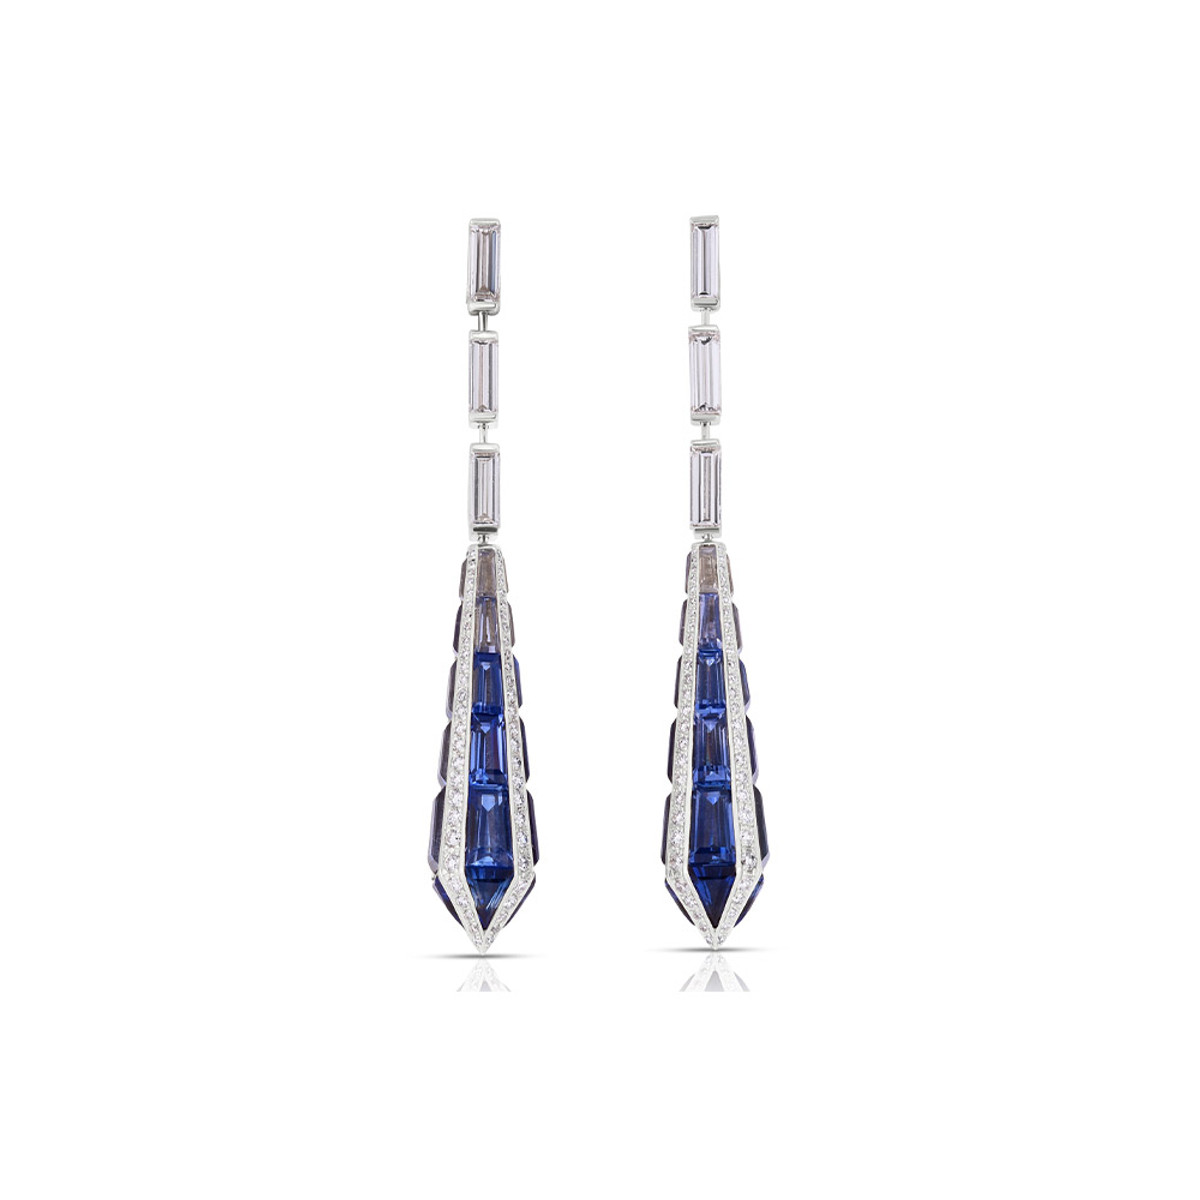 Hyde Park Collection 18K White Gold Sapphire and Diamond Drop Earrings-61610 Product Image